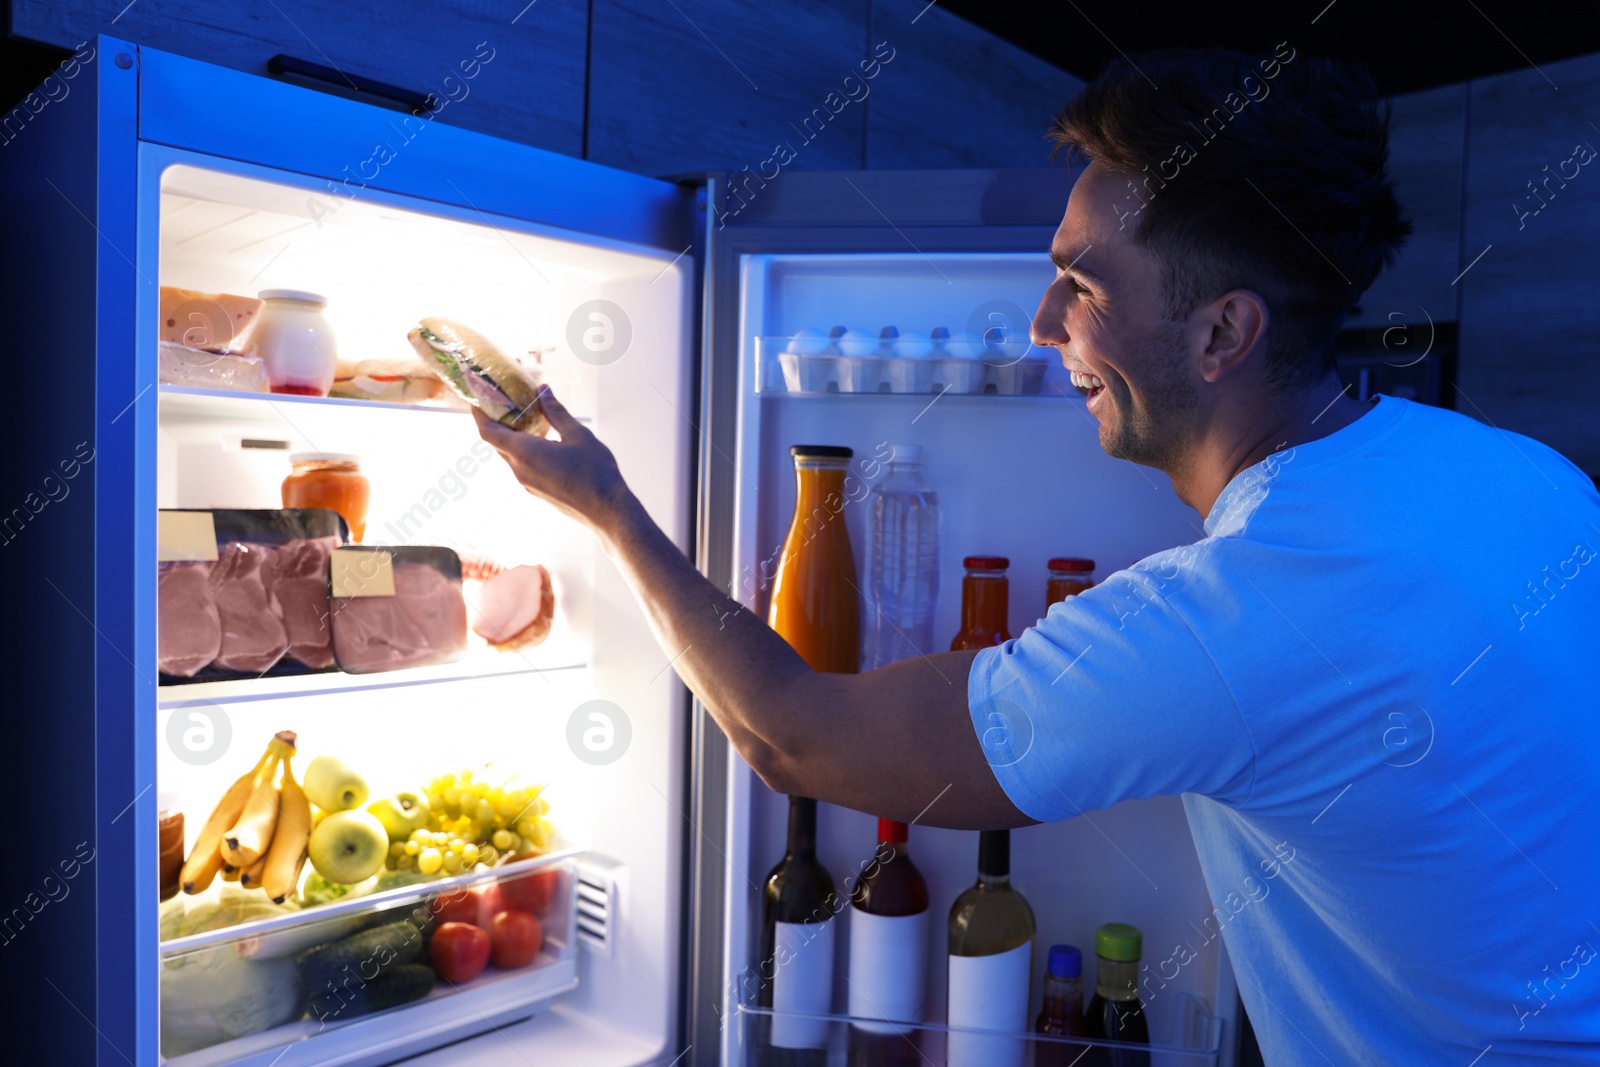 Photo of Man taking sandwich out of refrigerator in kitchen at night